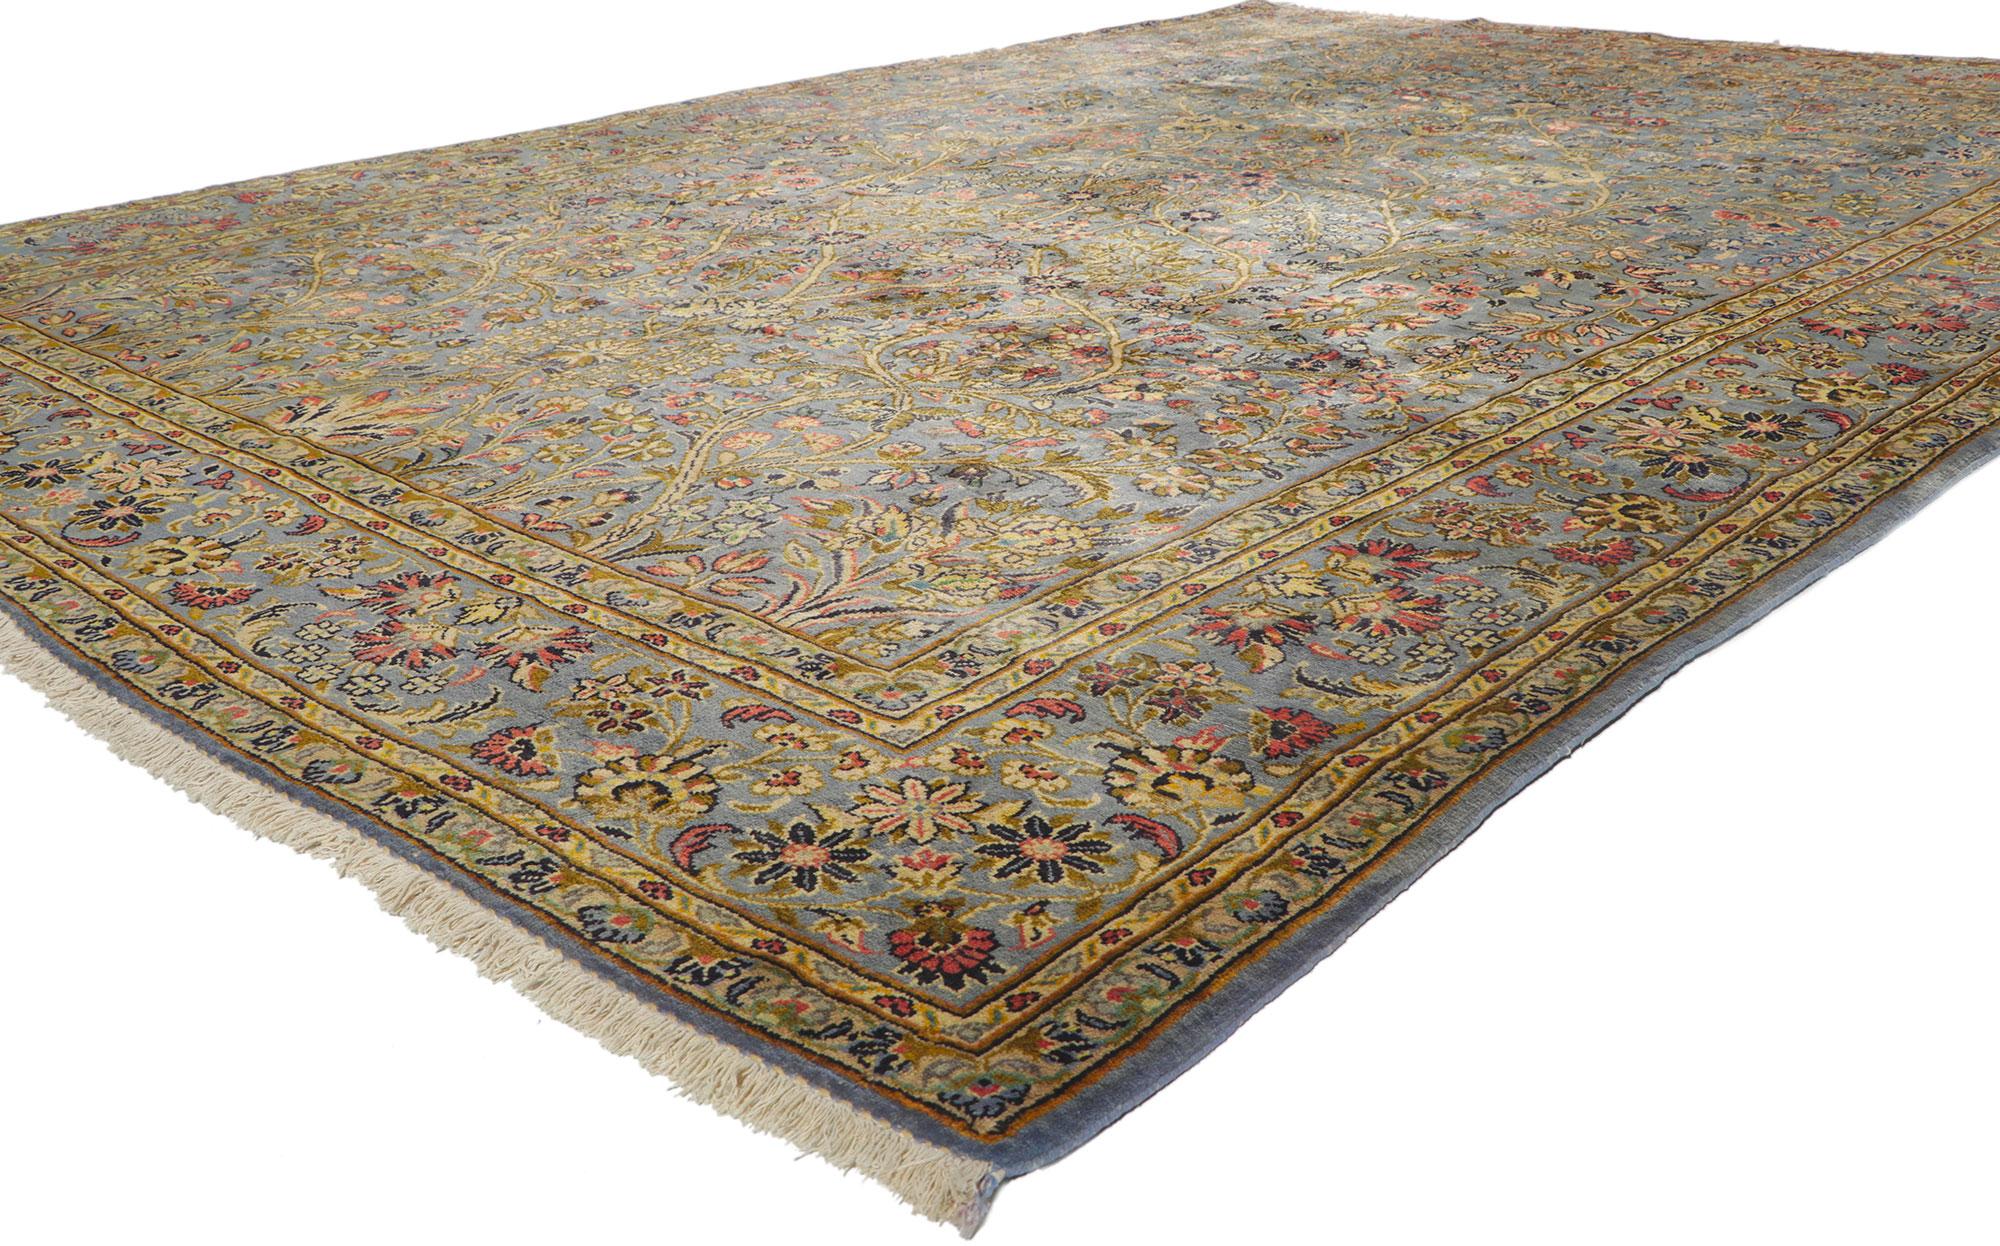 61037 Vintage Persian Kashan Rug, 07'11 x 11'06. Emanating an aura of refined tranquility and warmth, this hand-knotted wool vintage Persian Kashan rug unveils a symphony of sophistication through its intricate pattern and graceful color palette. A